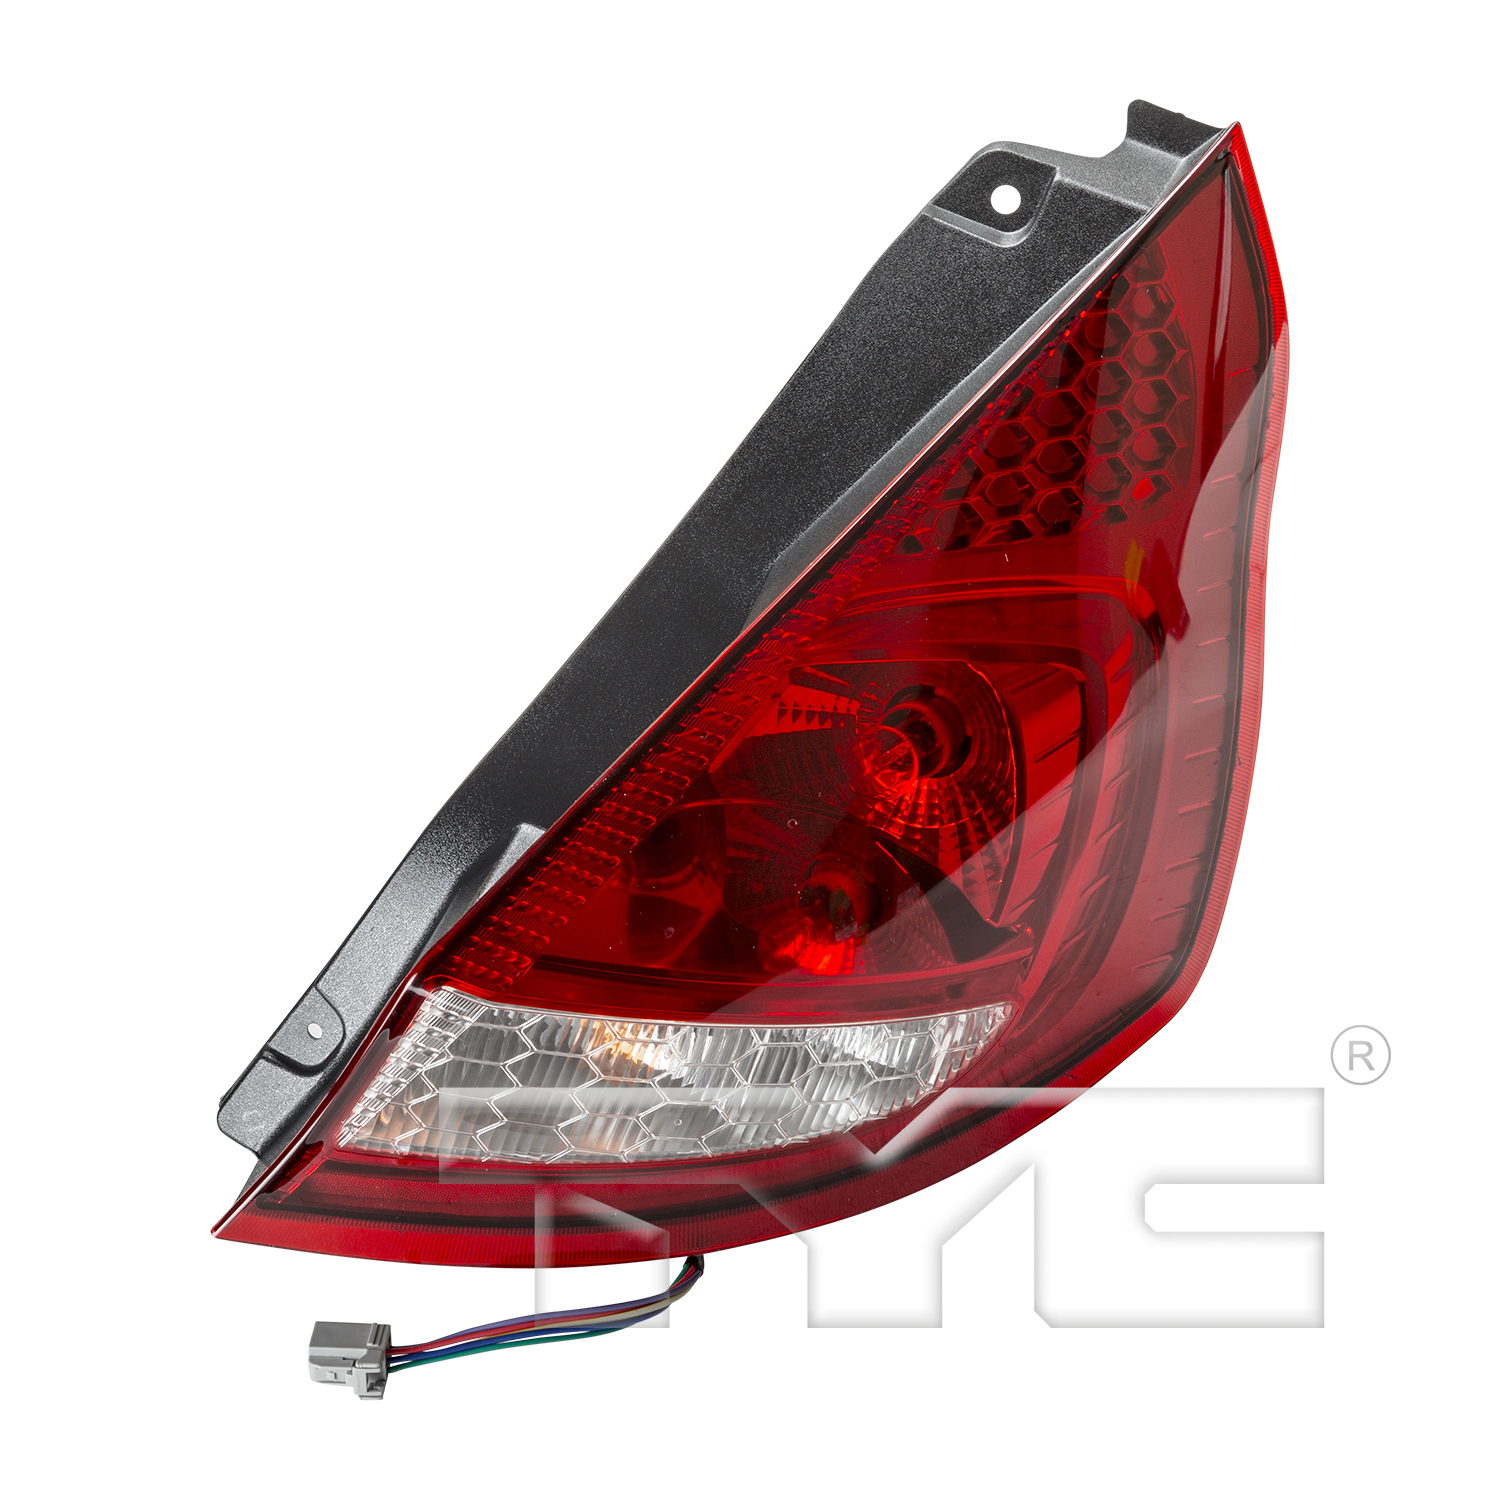 Aftermarket TAILLIGHTS for FORD - FIESTA, FIESTA,11-13,RT Taillamp assy